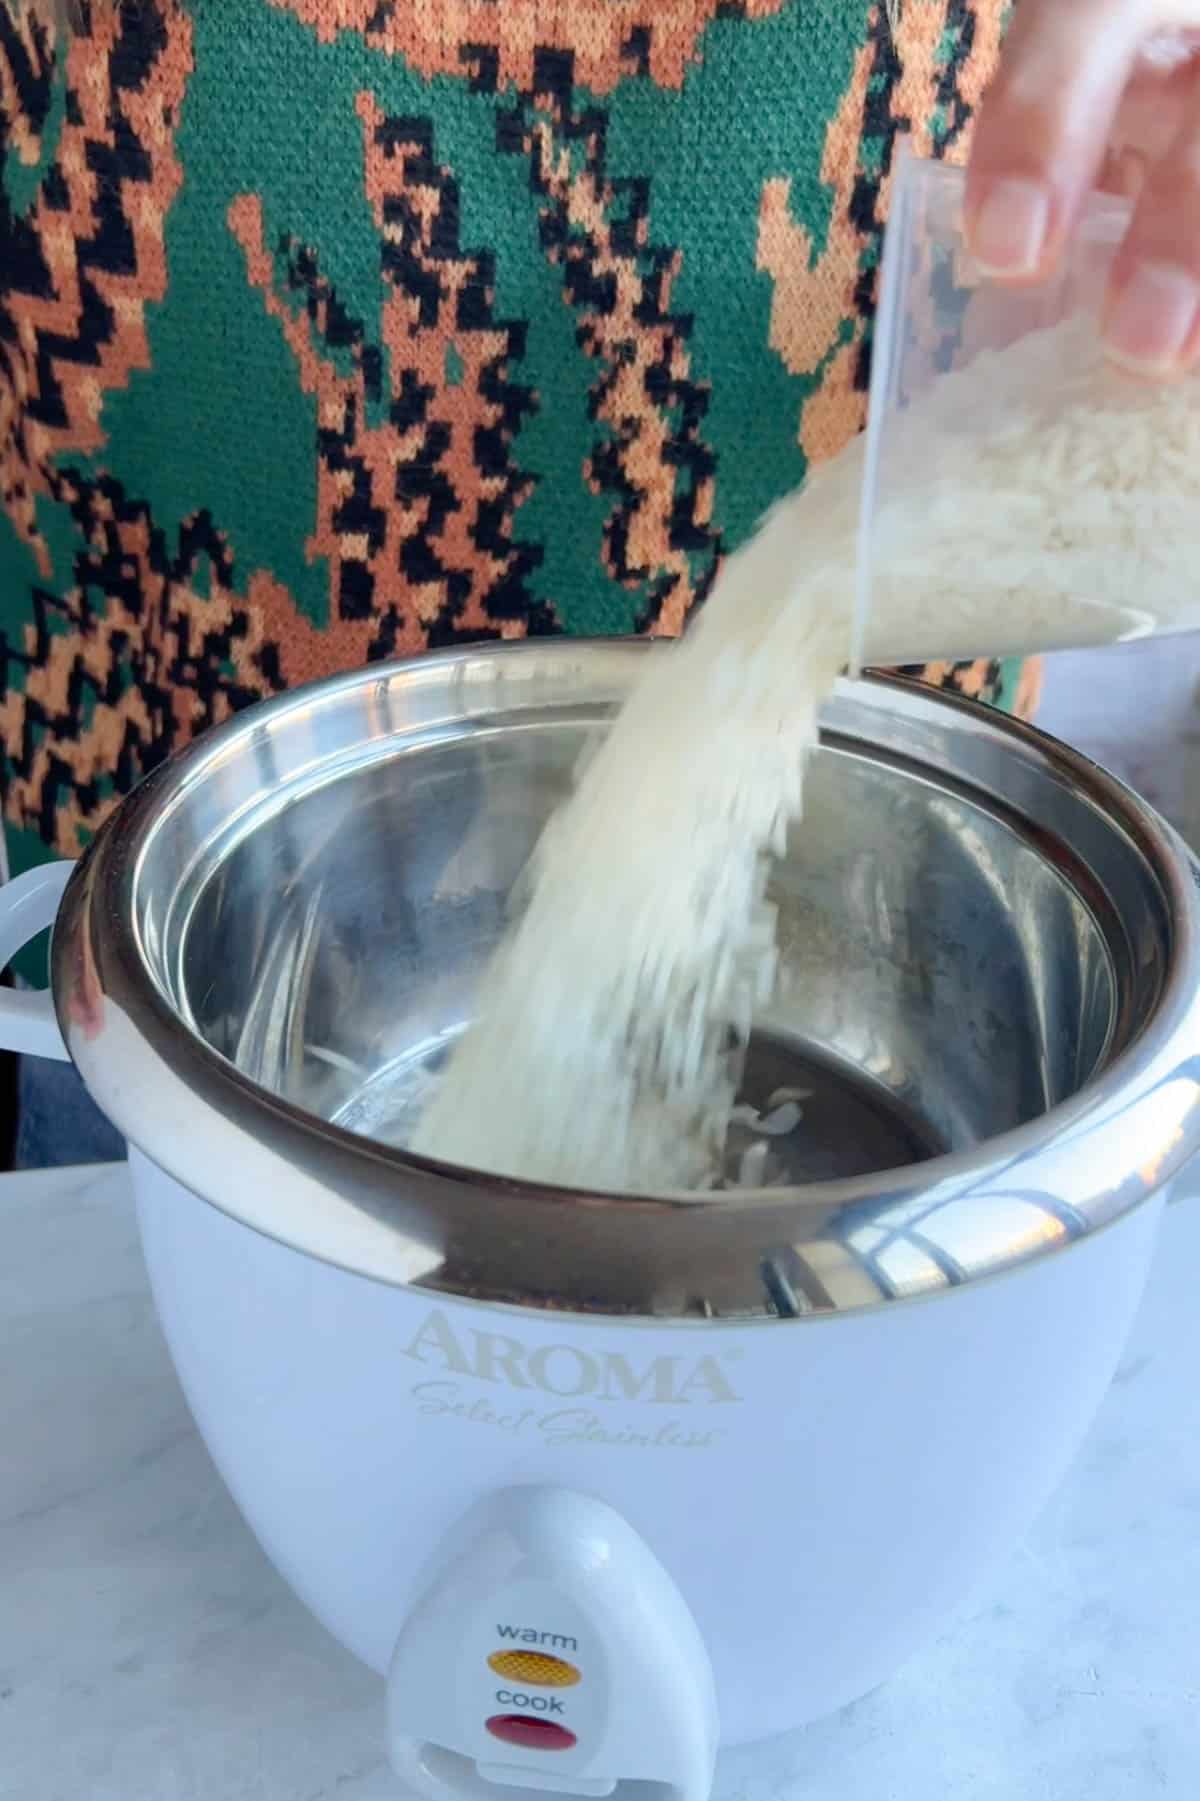 Pouring white rice into the bowl of an Aroma cooker.